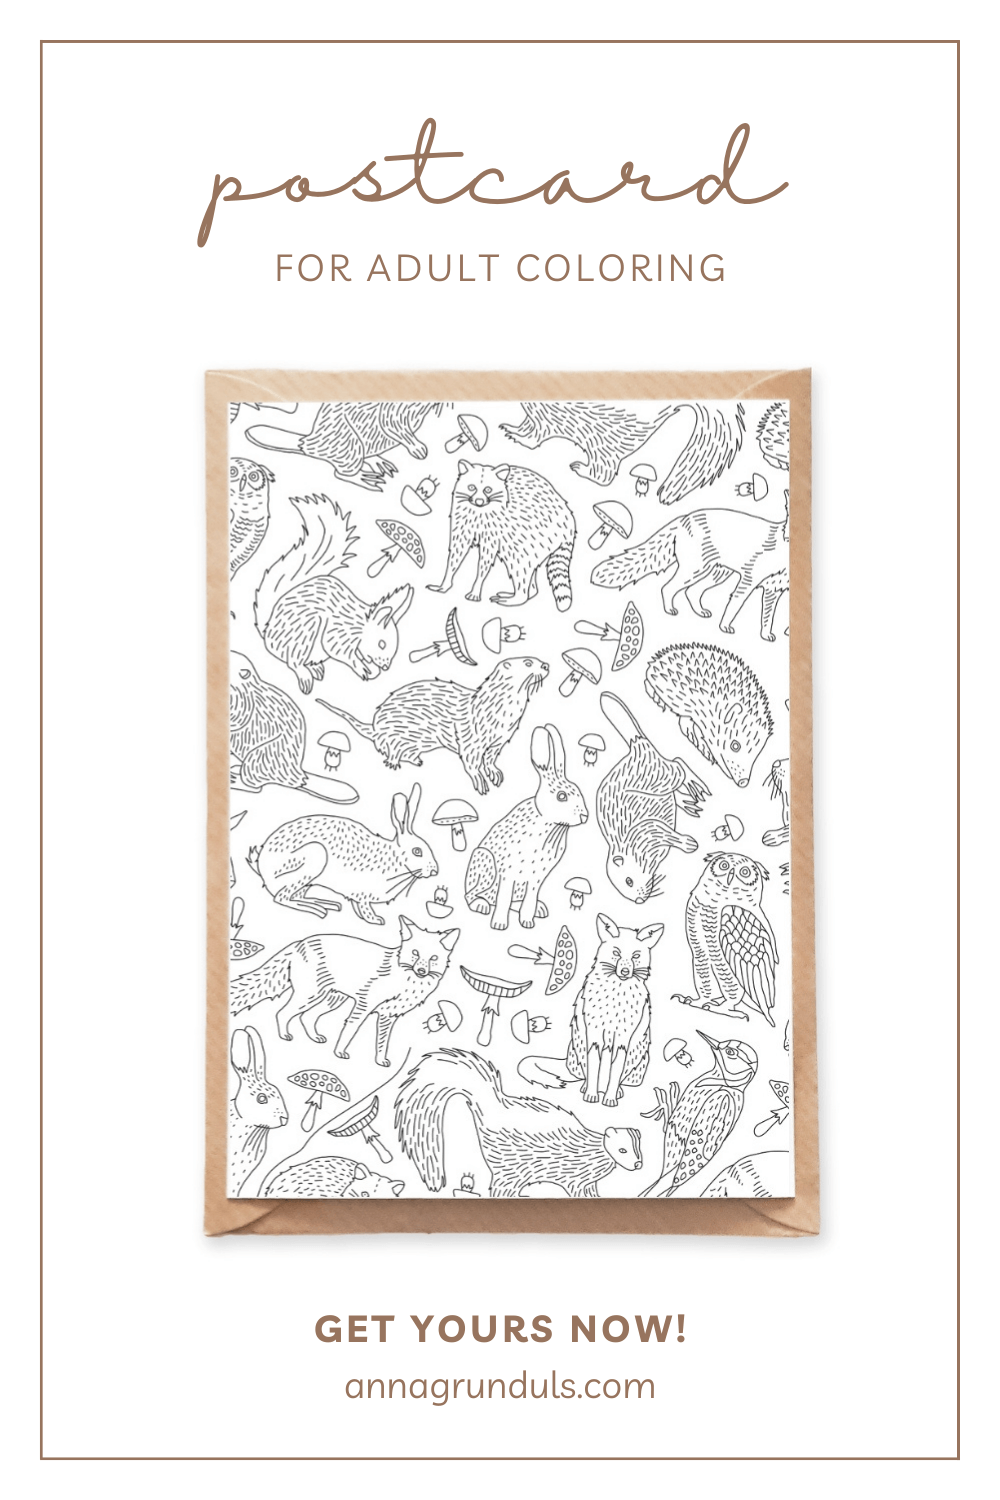 forest animals postcard for adult coloring pinterest pin